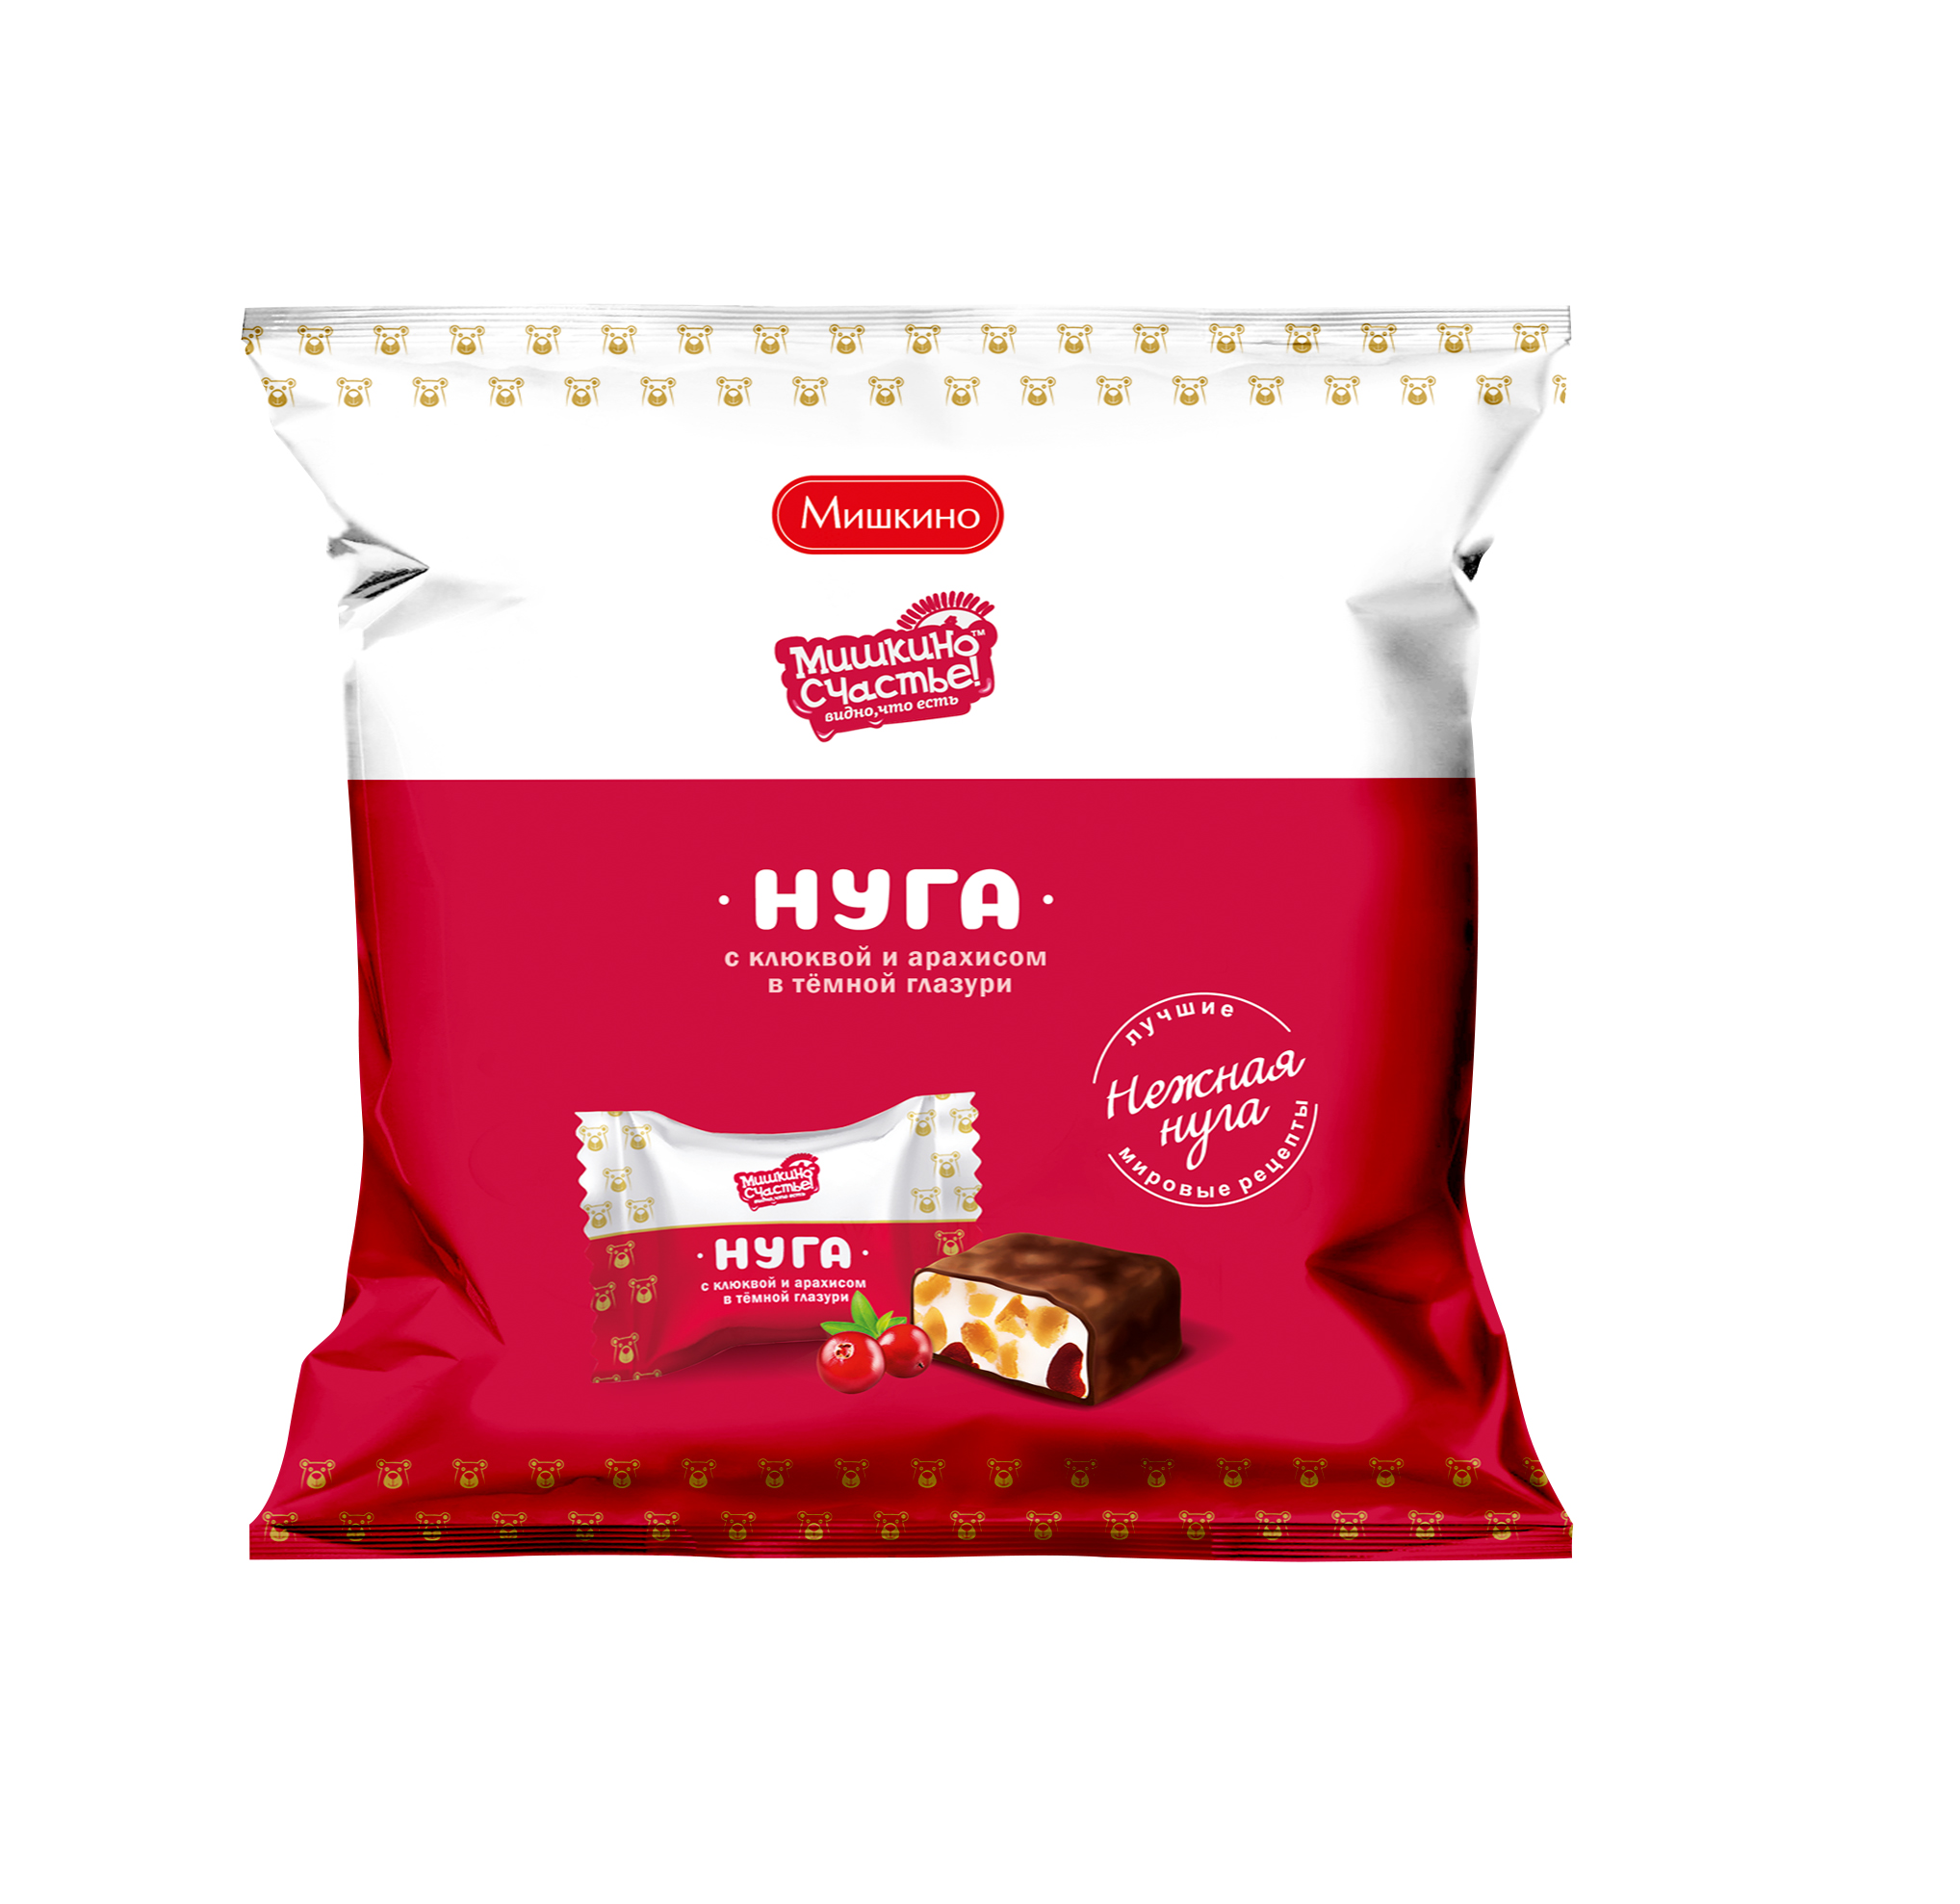 Nougat with peanuts and cranberries sweets covered with glaze "Mishkino happiness" 240 g. (24)